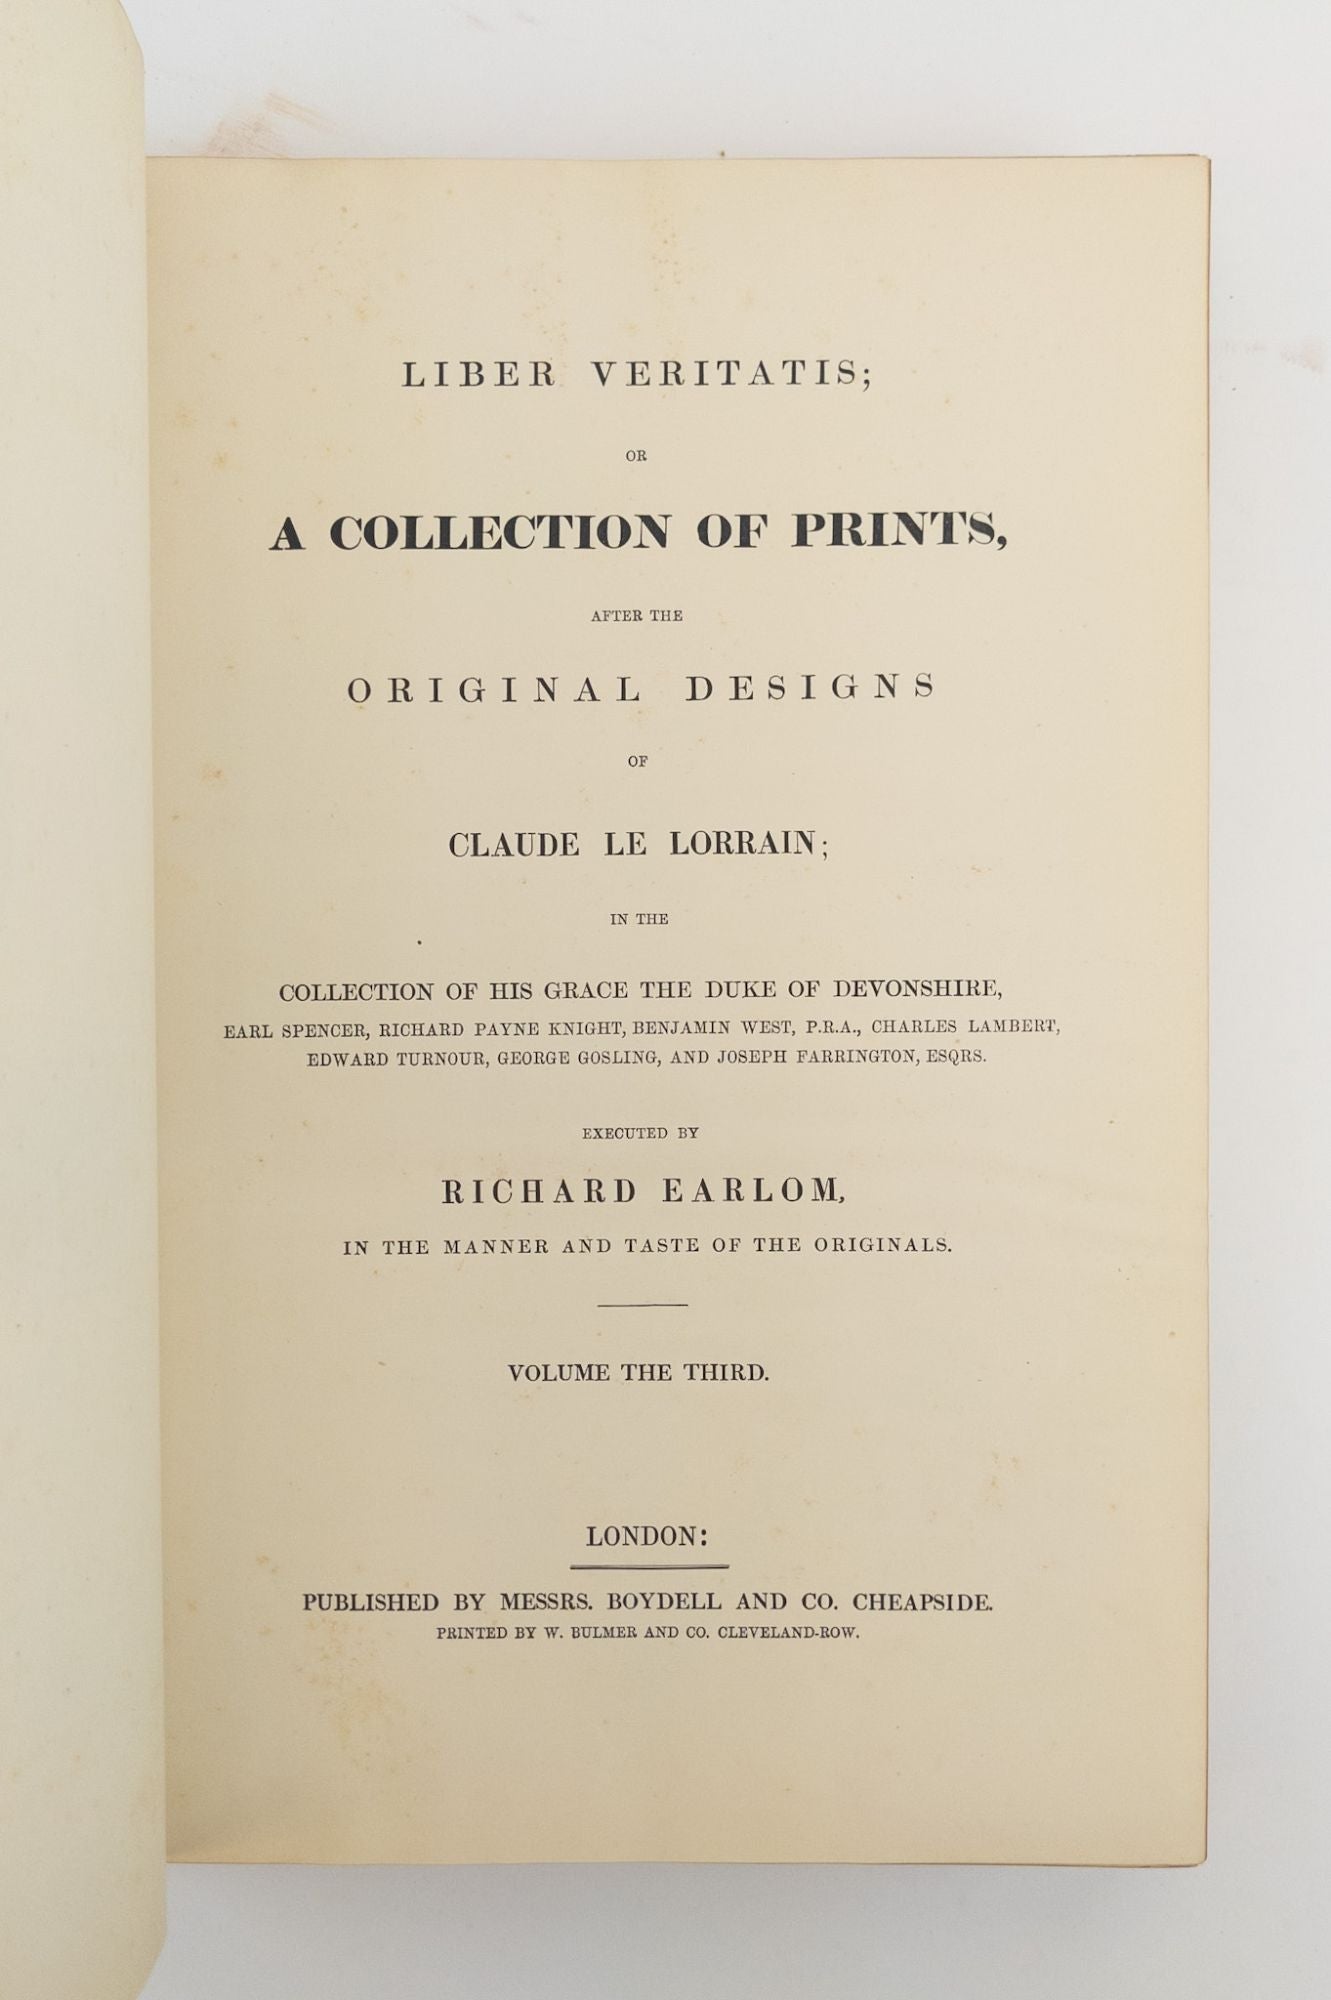 Product Image for LIBER VERITATIS; OR A COLLECTION OF PRINTS AFTER THE ORIGINAL DESIGNS OF CLAUDE LE LORRAIN; IN THE COLLECTION OF [Vol. I-II] HIS GRACE THE DUKE OF DEVONSHIRE [VOL. III: THE DUKE OF DEVONSHIRE, EARL SPENCER, RICHARD PAYNE KNIGHT, BENJAMIN WEST., CHARLES LA